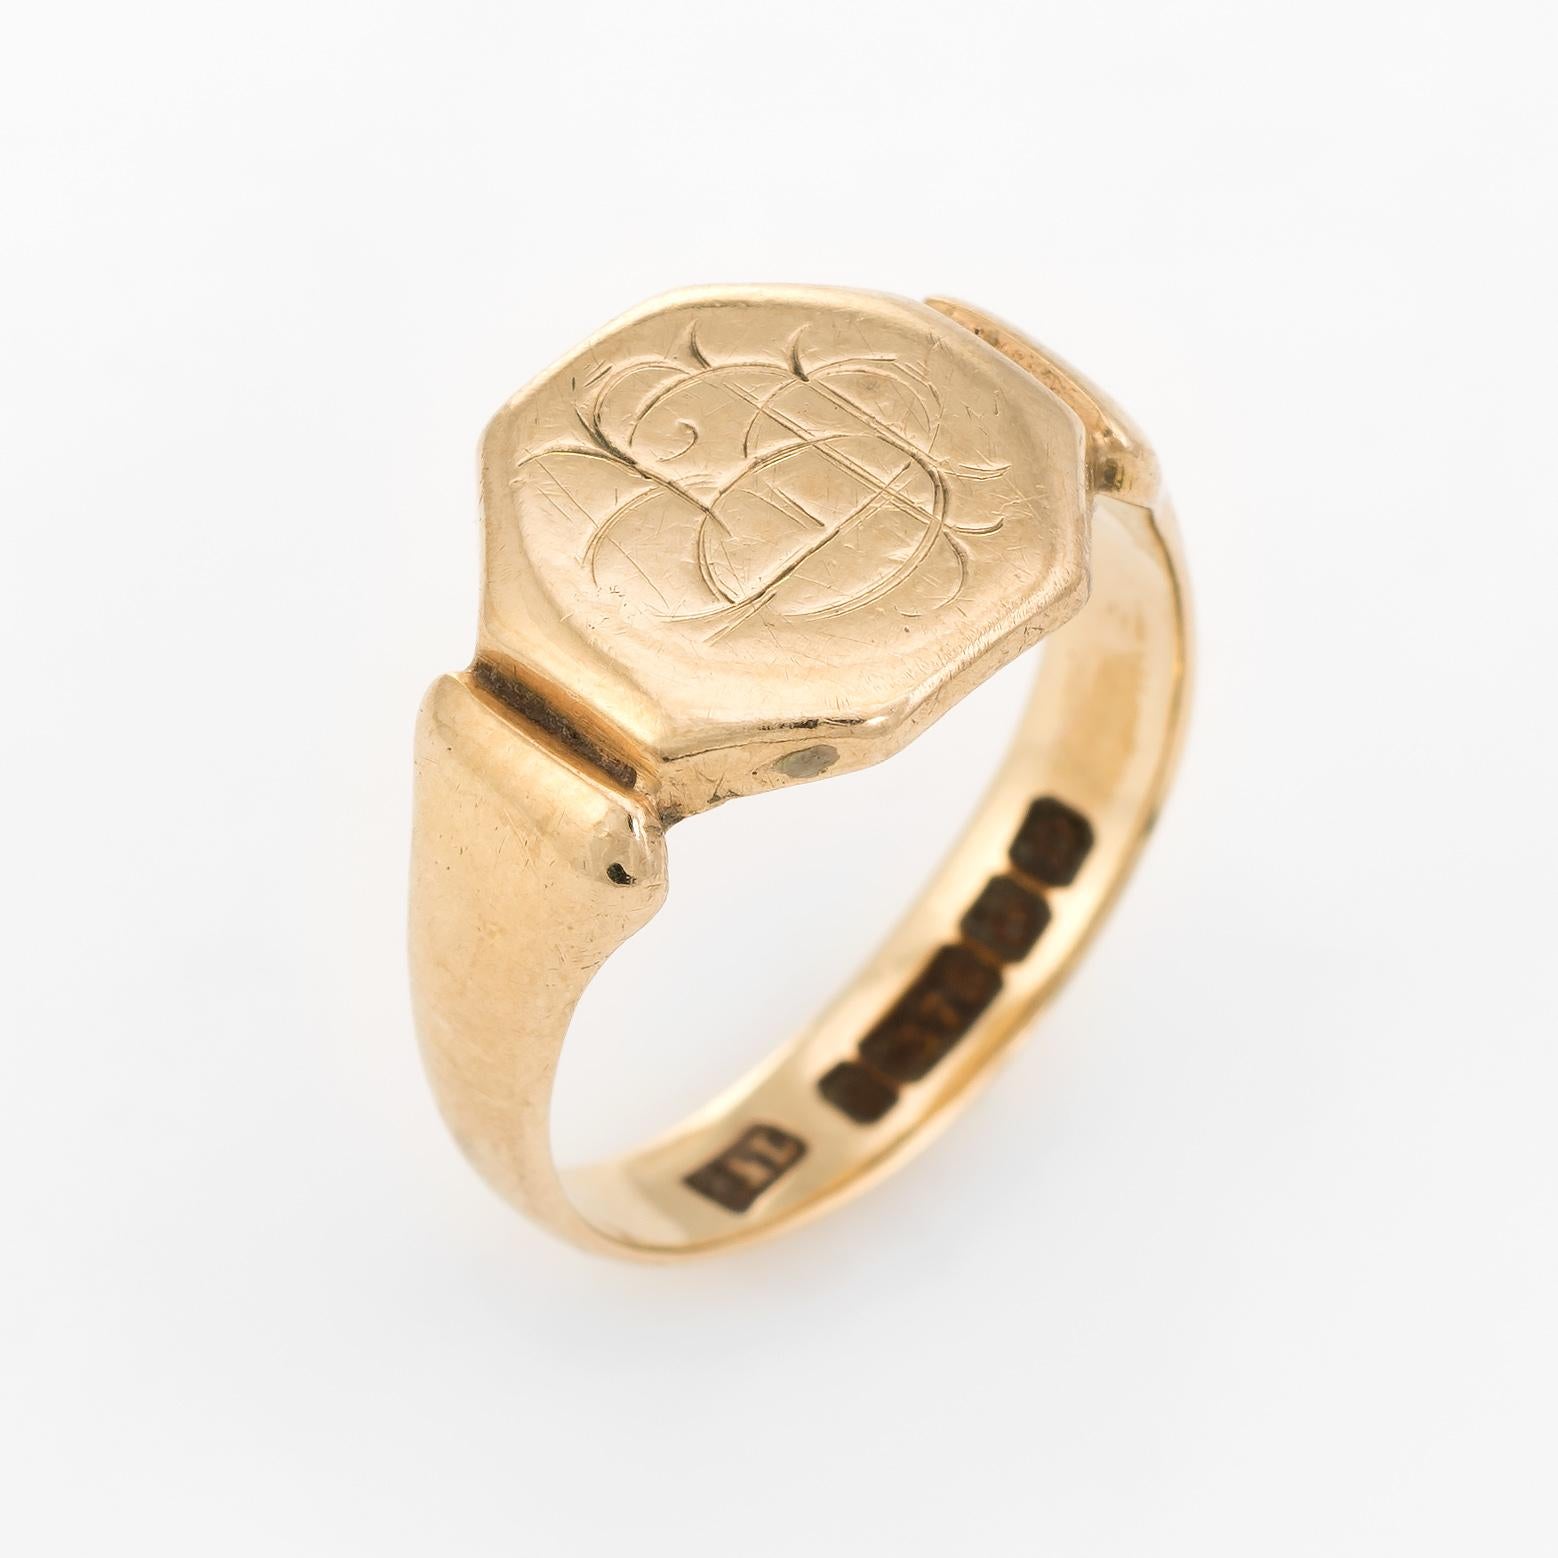 Finely detailed vintage Art Deco era (circa 1928) signet ring, crafted in 9 karat yellow gold. 

The hexagonal signet mount is inscribed with several initials though due to wear we are unable to decipher the letters. 

The ring was sourced on our